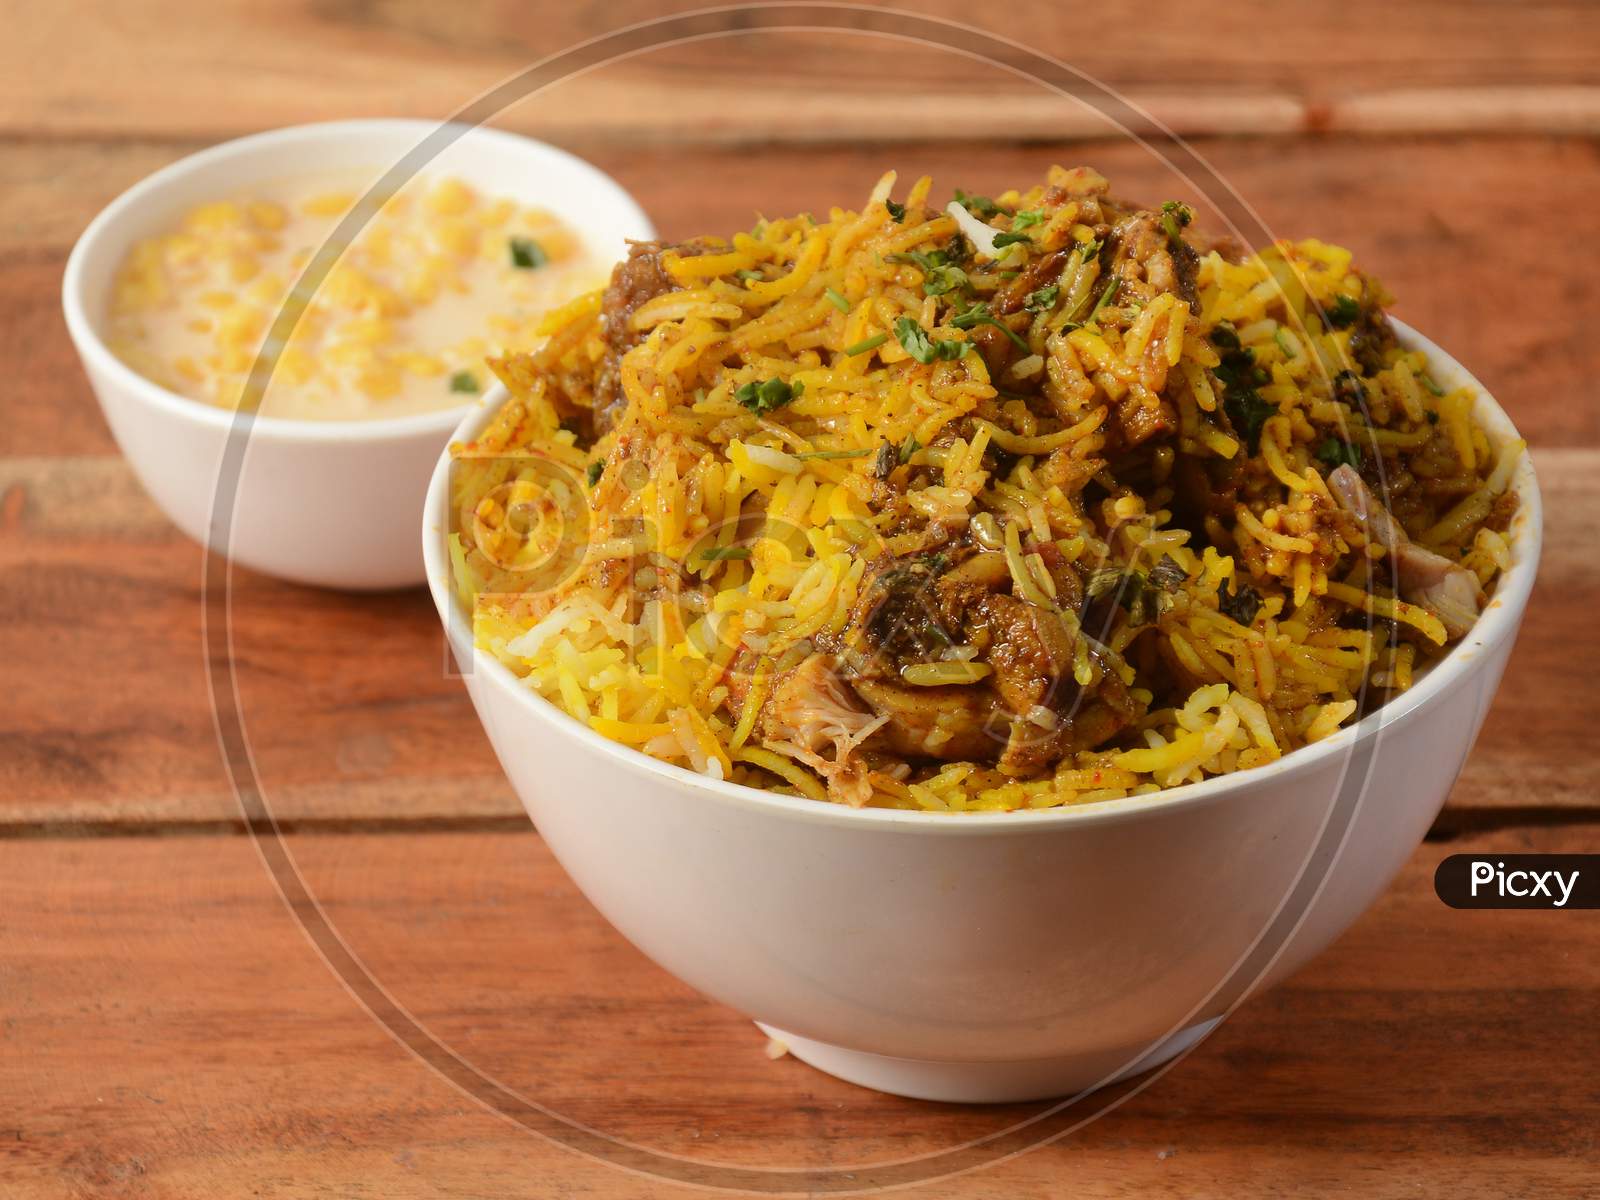 Chicken Makhani Biryani Made Of Basmati Rice Cooked With Masala Spices, Served With Yogurt , Selective Focus